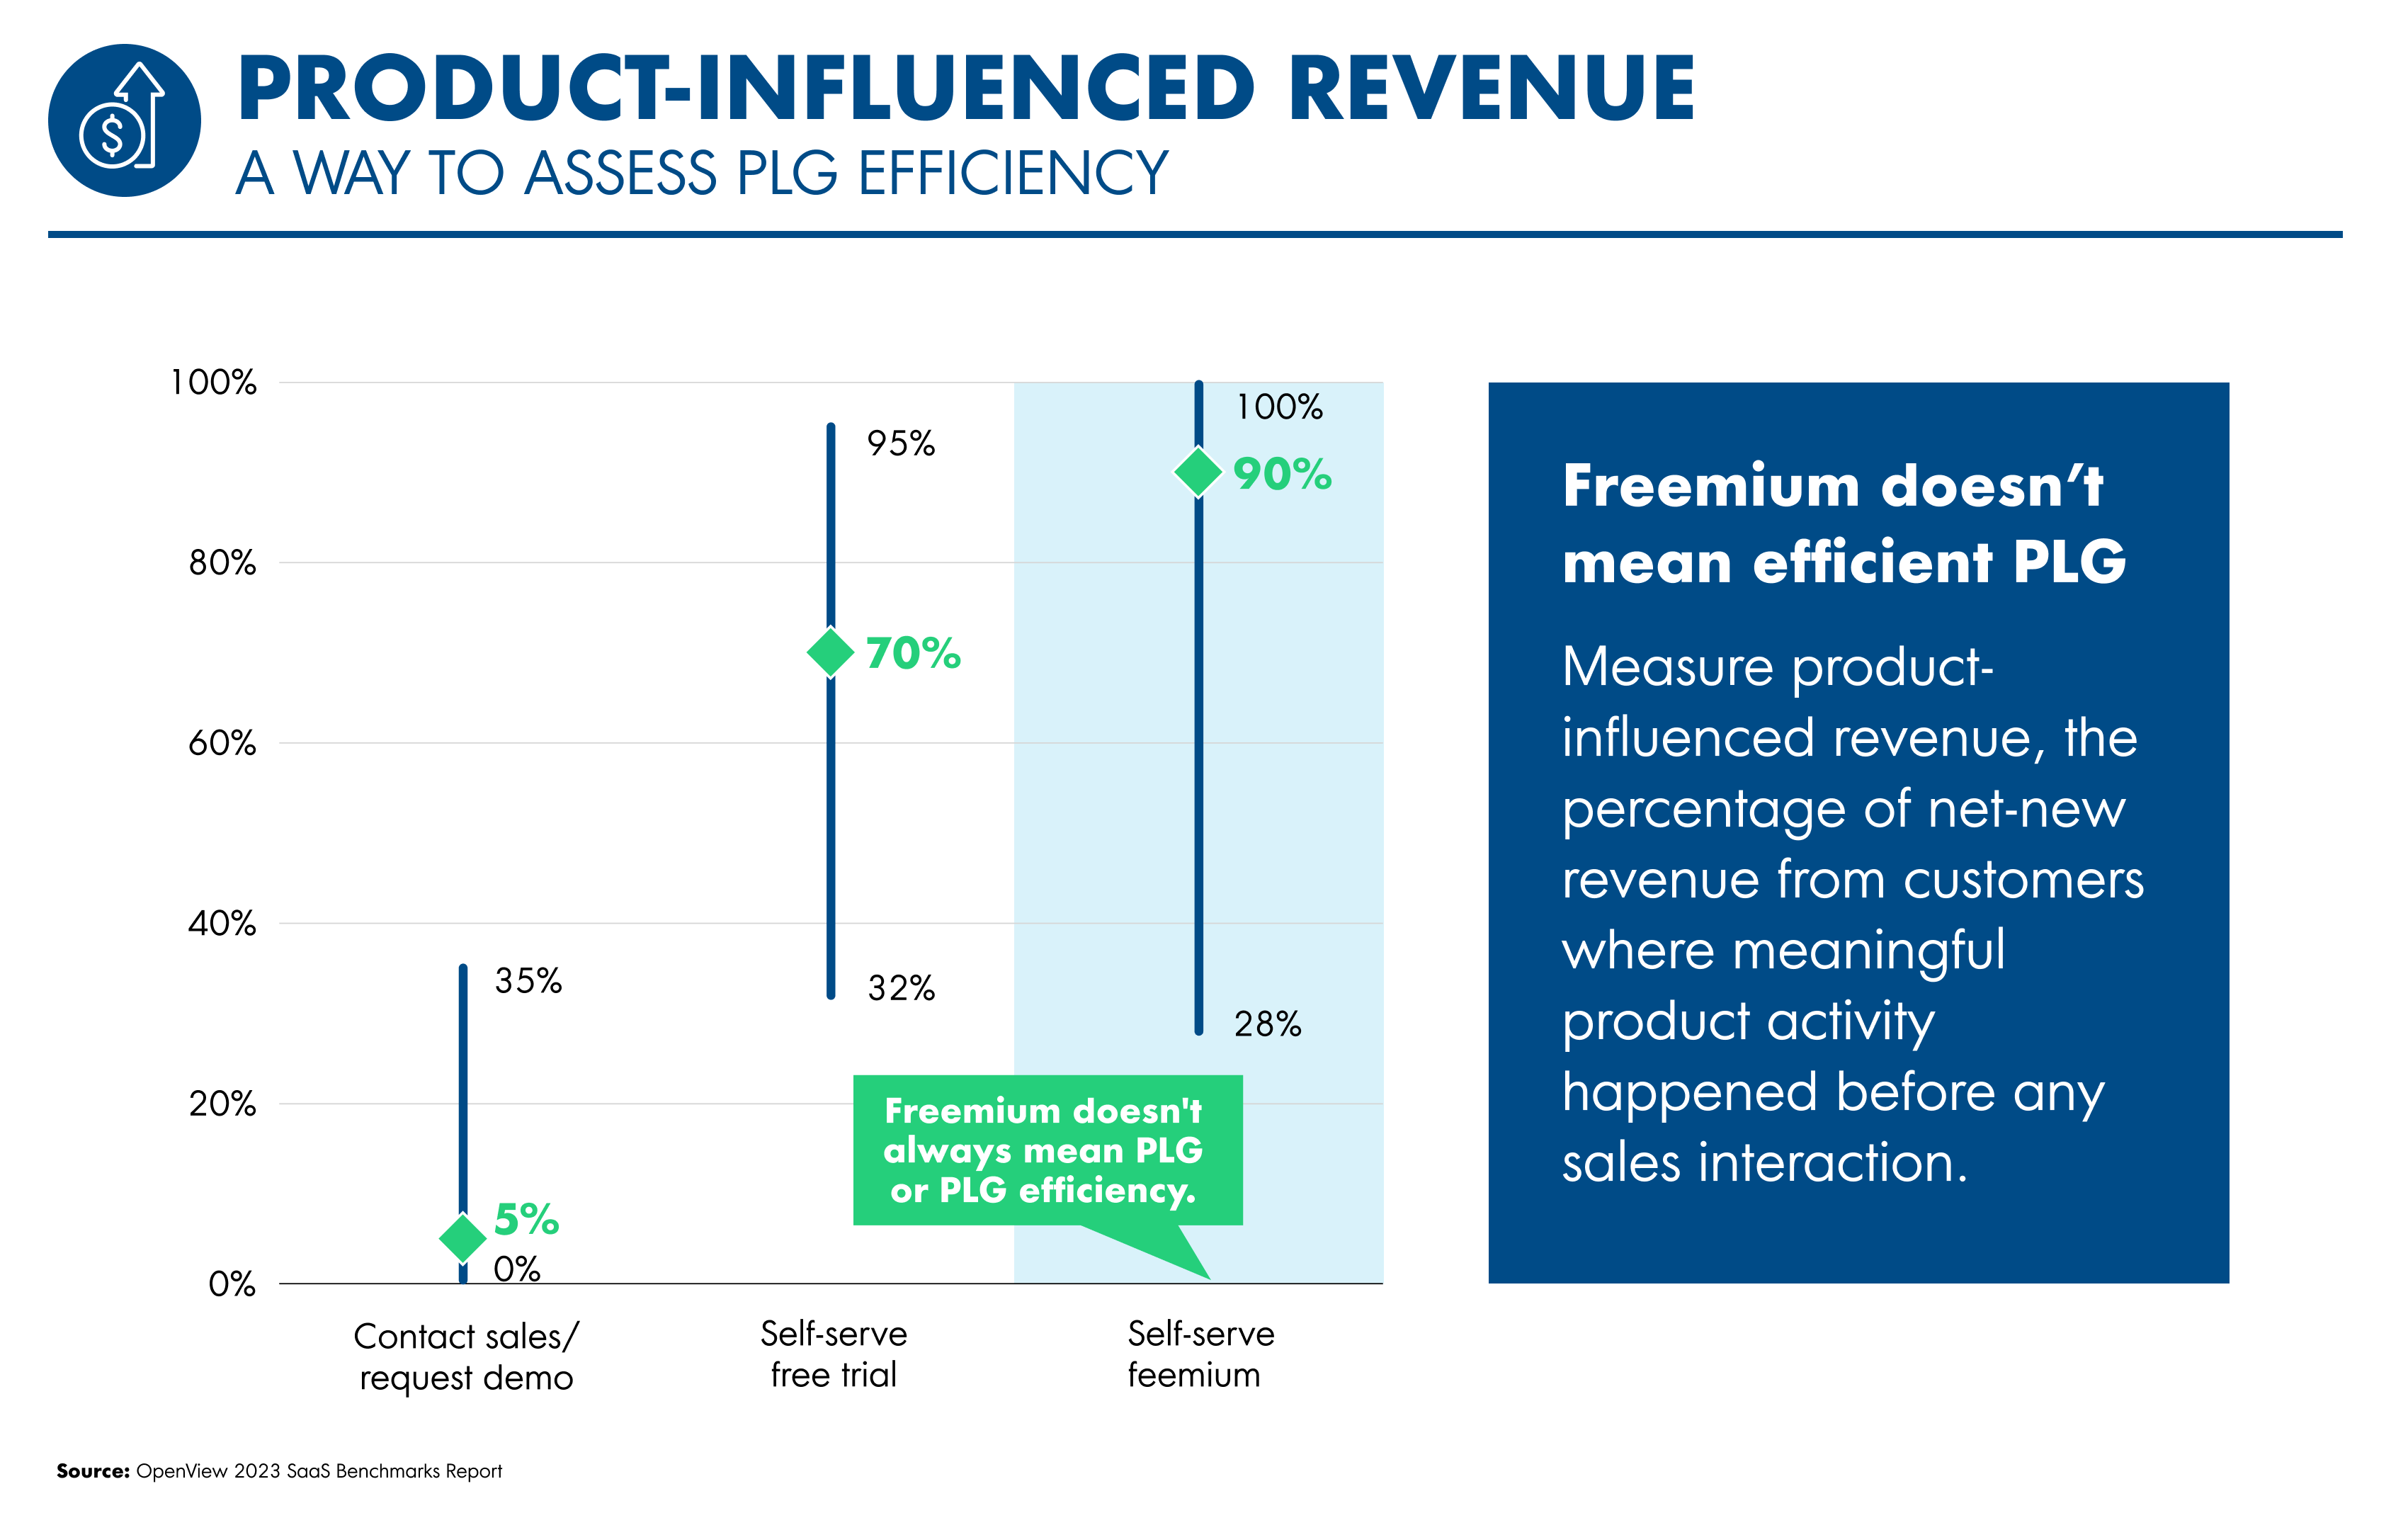 Product-influenced revenue